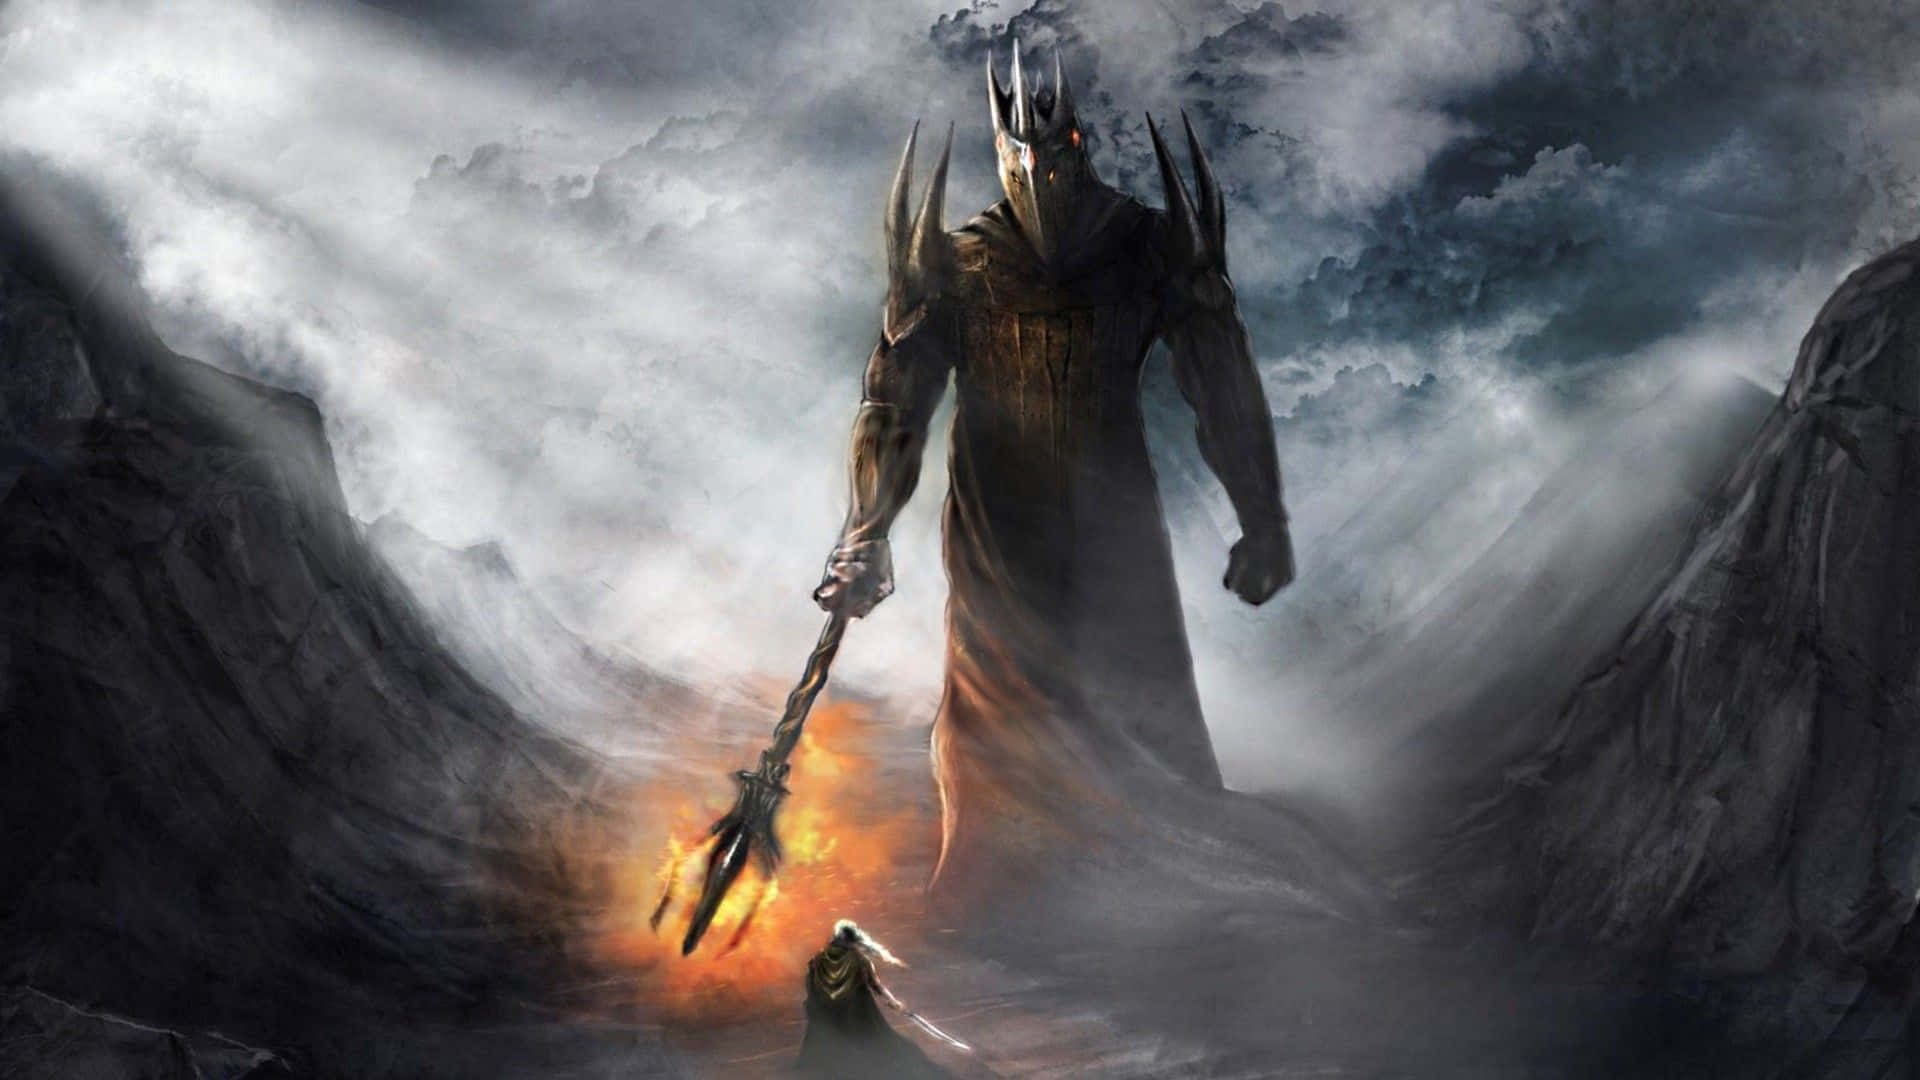 The Epic Journey of LOTR Characters in Middle Earth